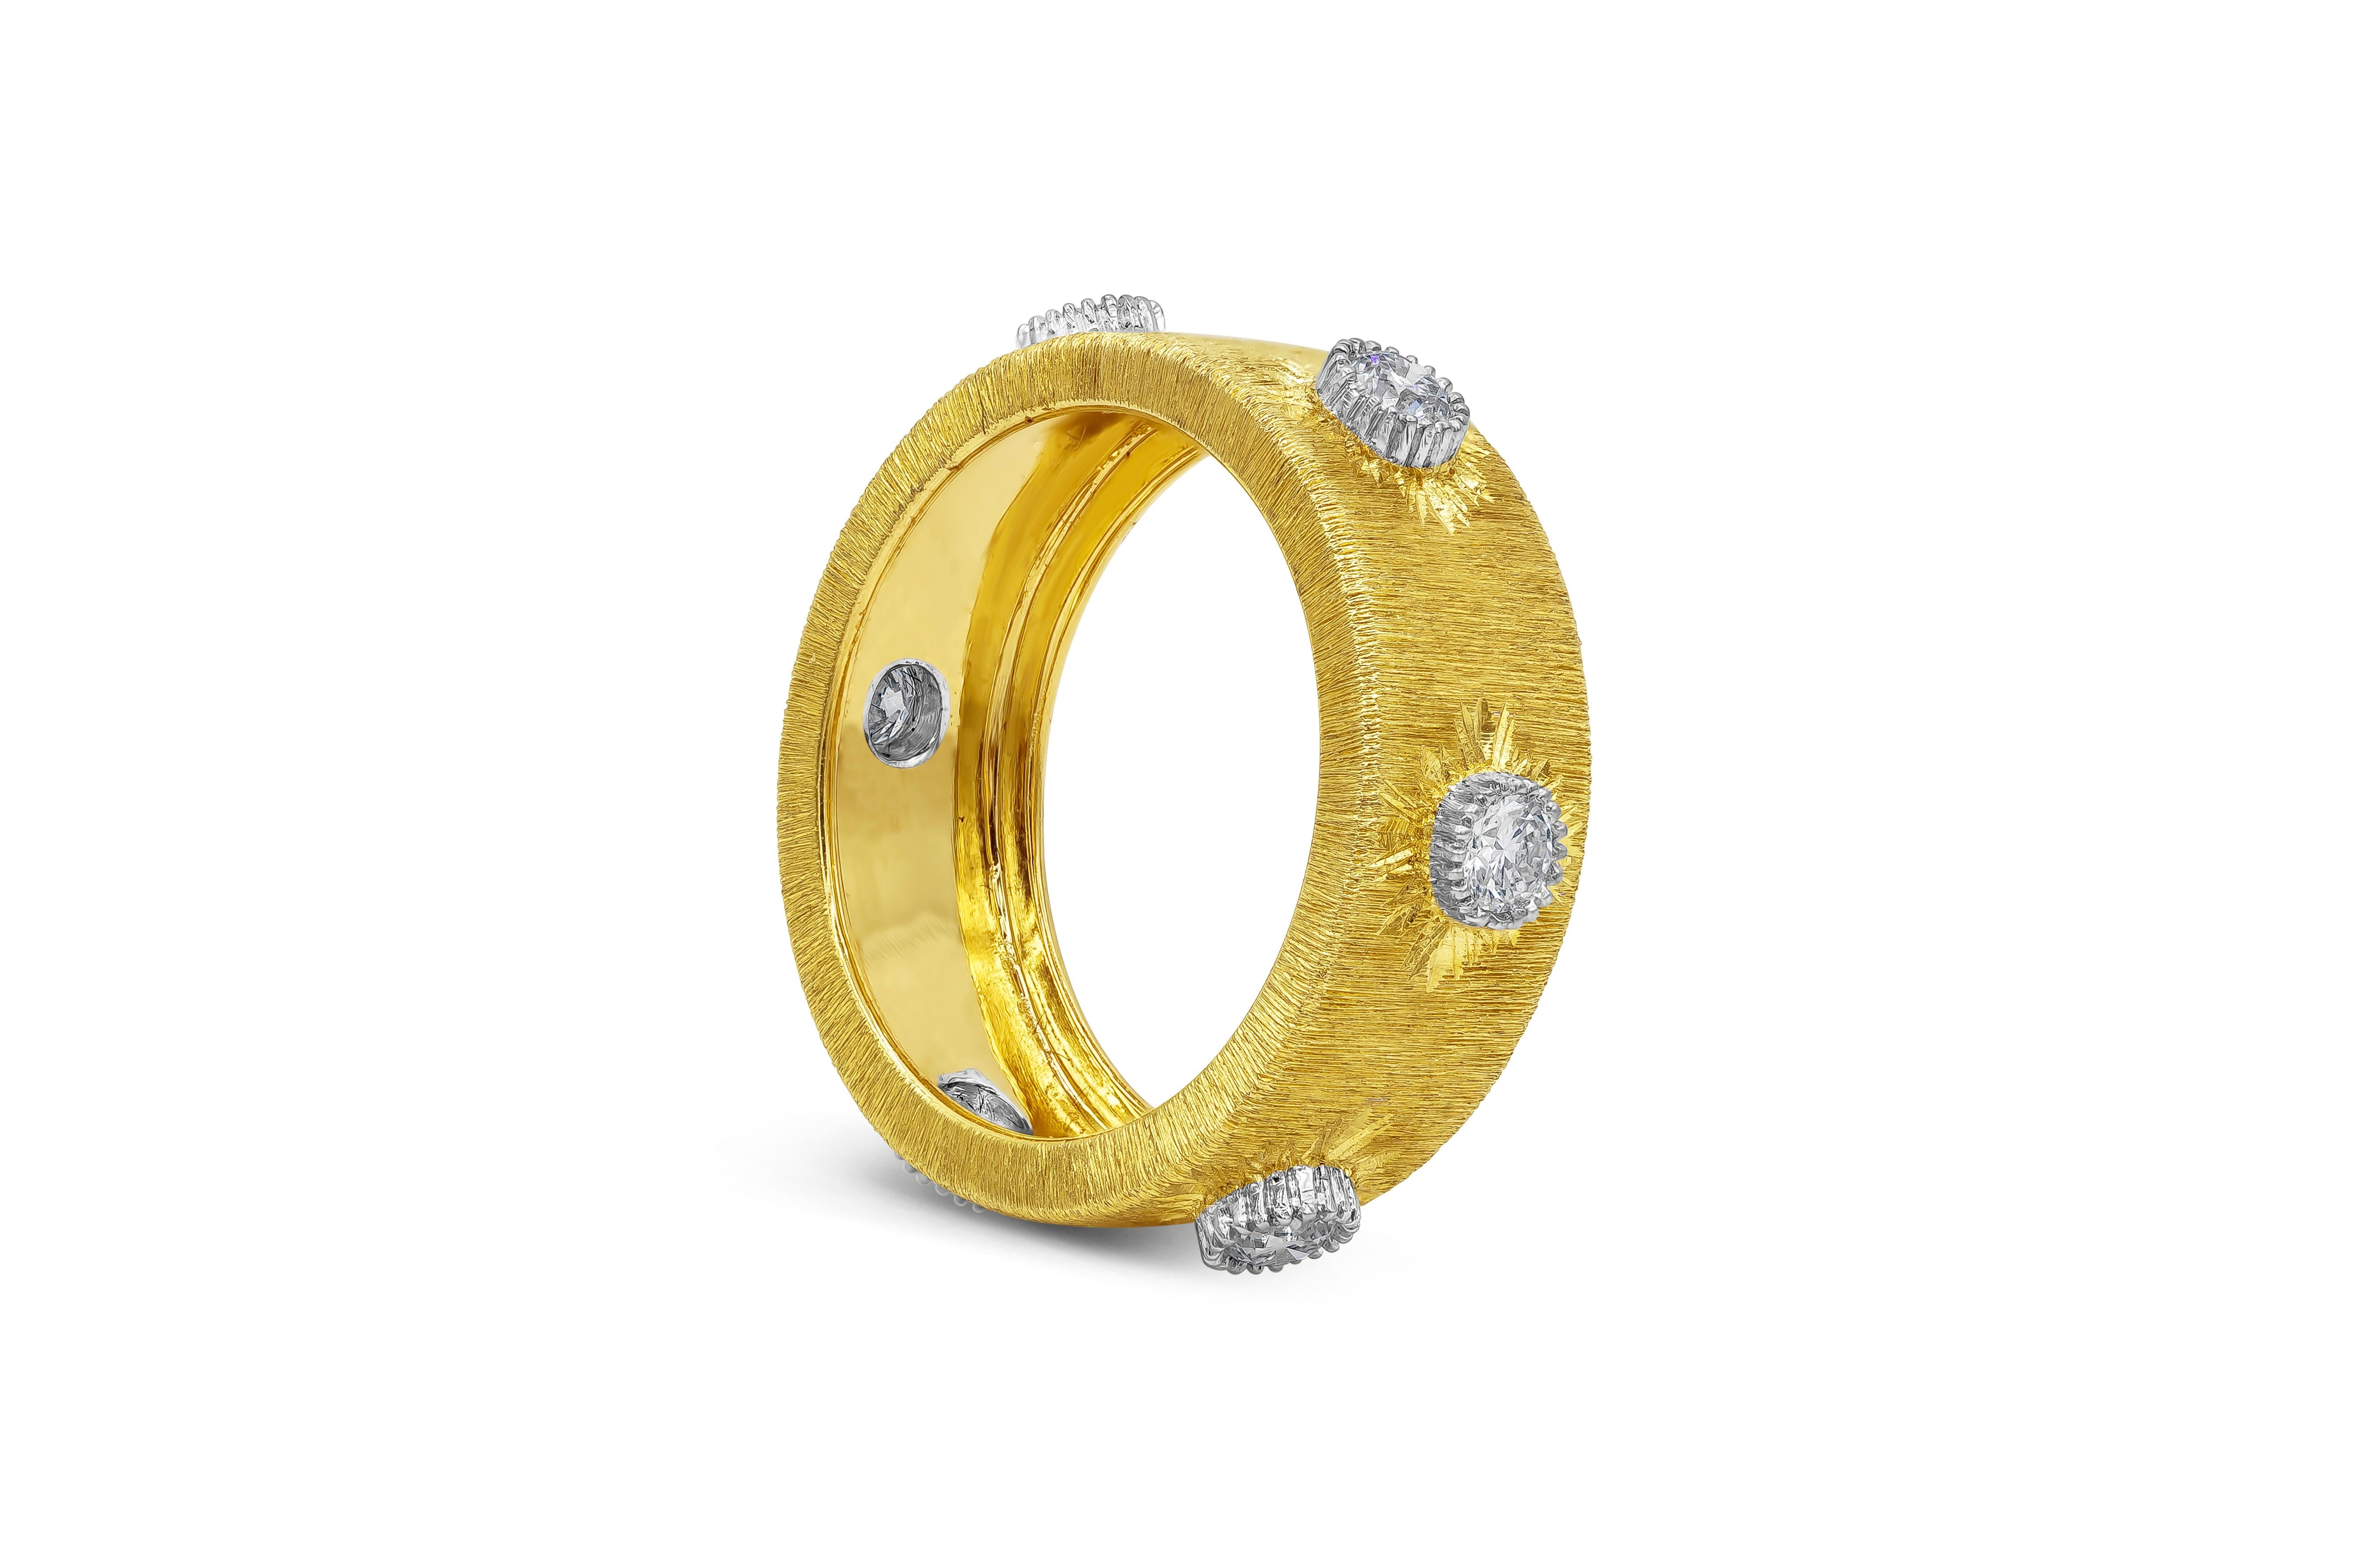 A beautiful and refined antique look fashion ring showcasing a brushed and domed yellow gold finish accented with a starburst design made in white gold. Design is accented with round brilliant diamonds. Diamonds weigh 0.60 carats total, F Color and